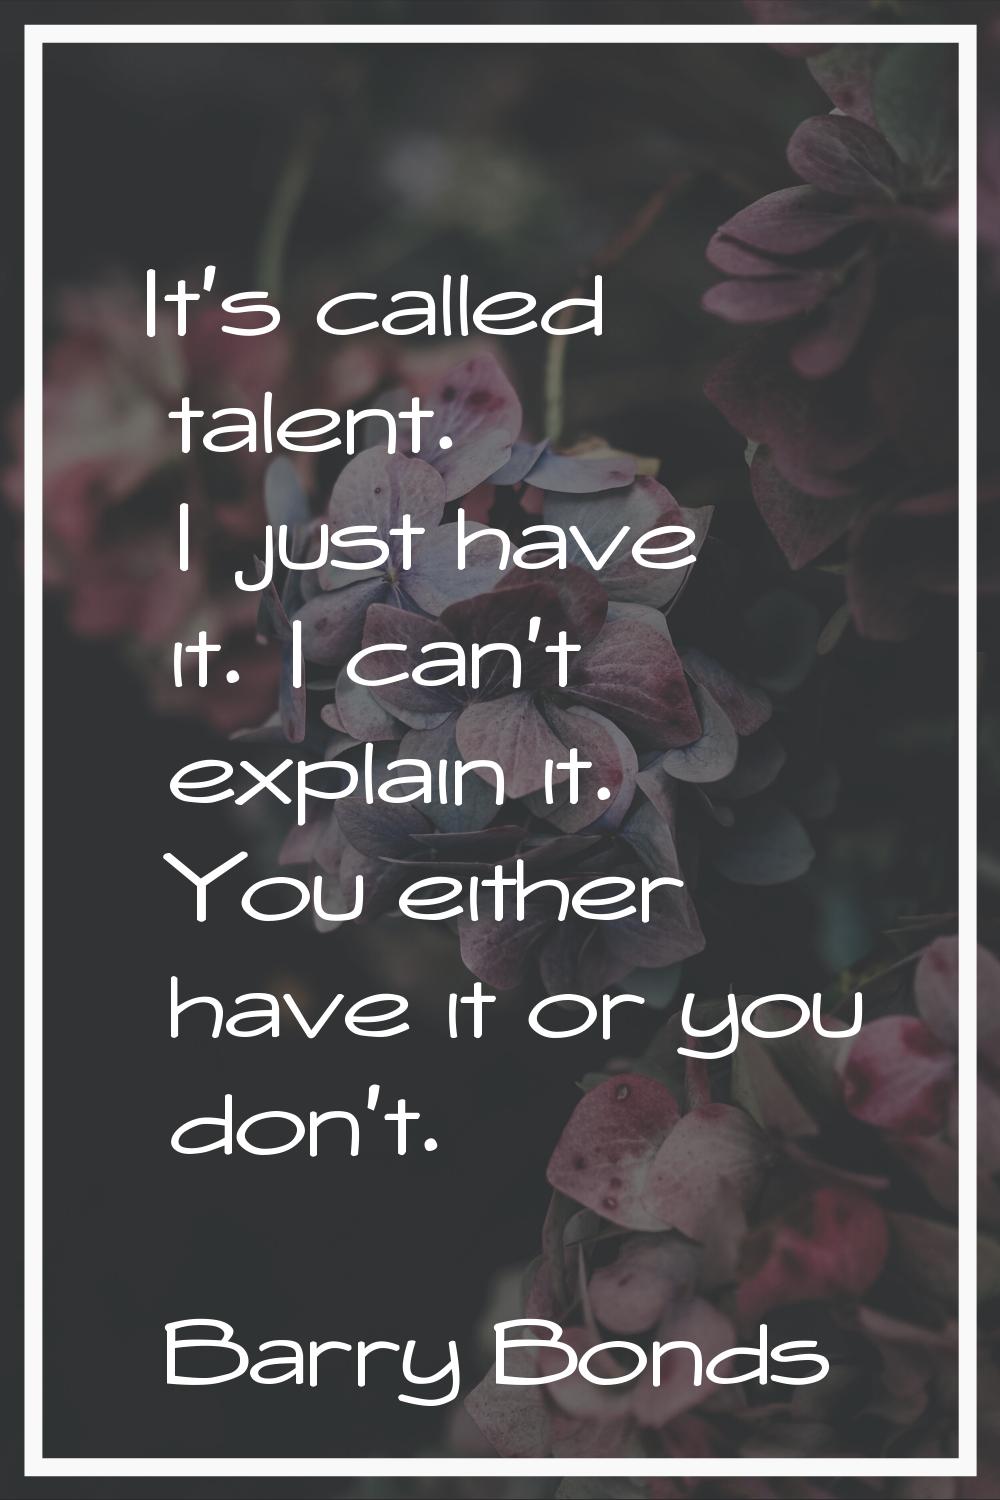 It's called talent. I just have it. I can't explain it. You either have it or you don't.